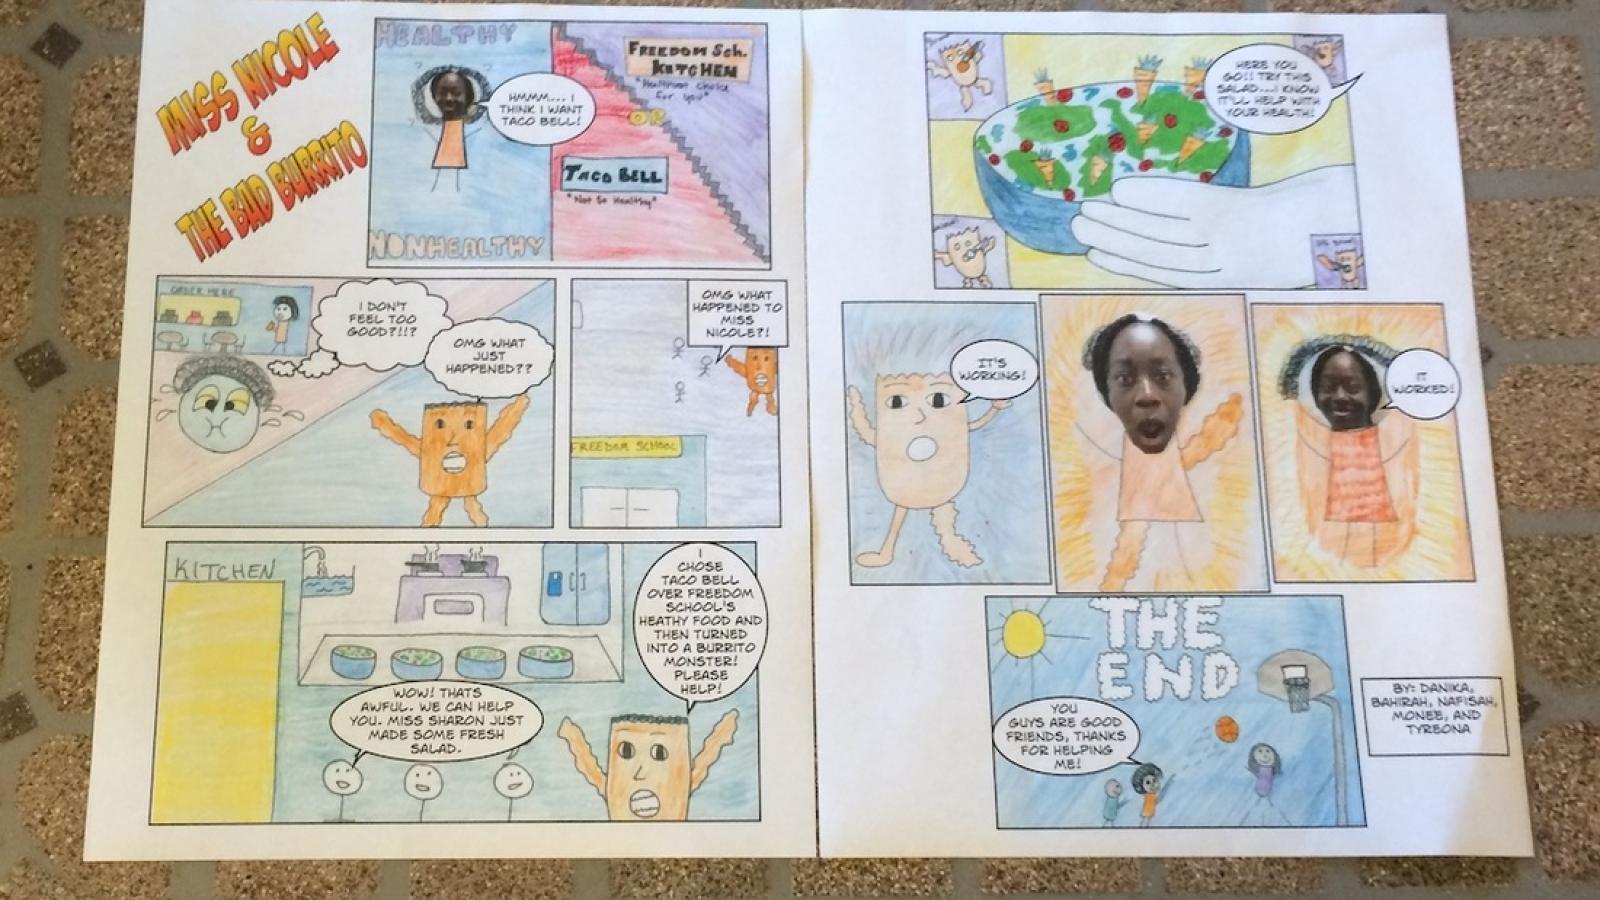 One Freedom School student's completed creative comic project